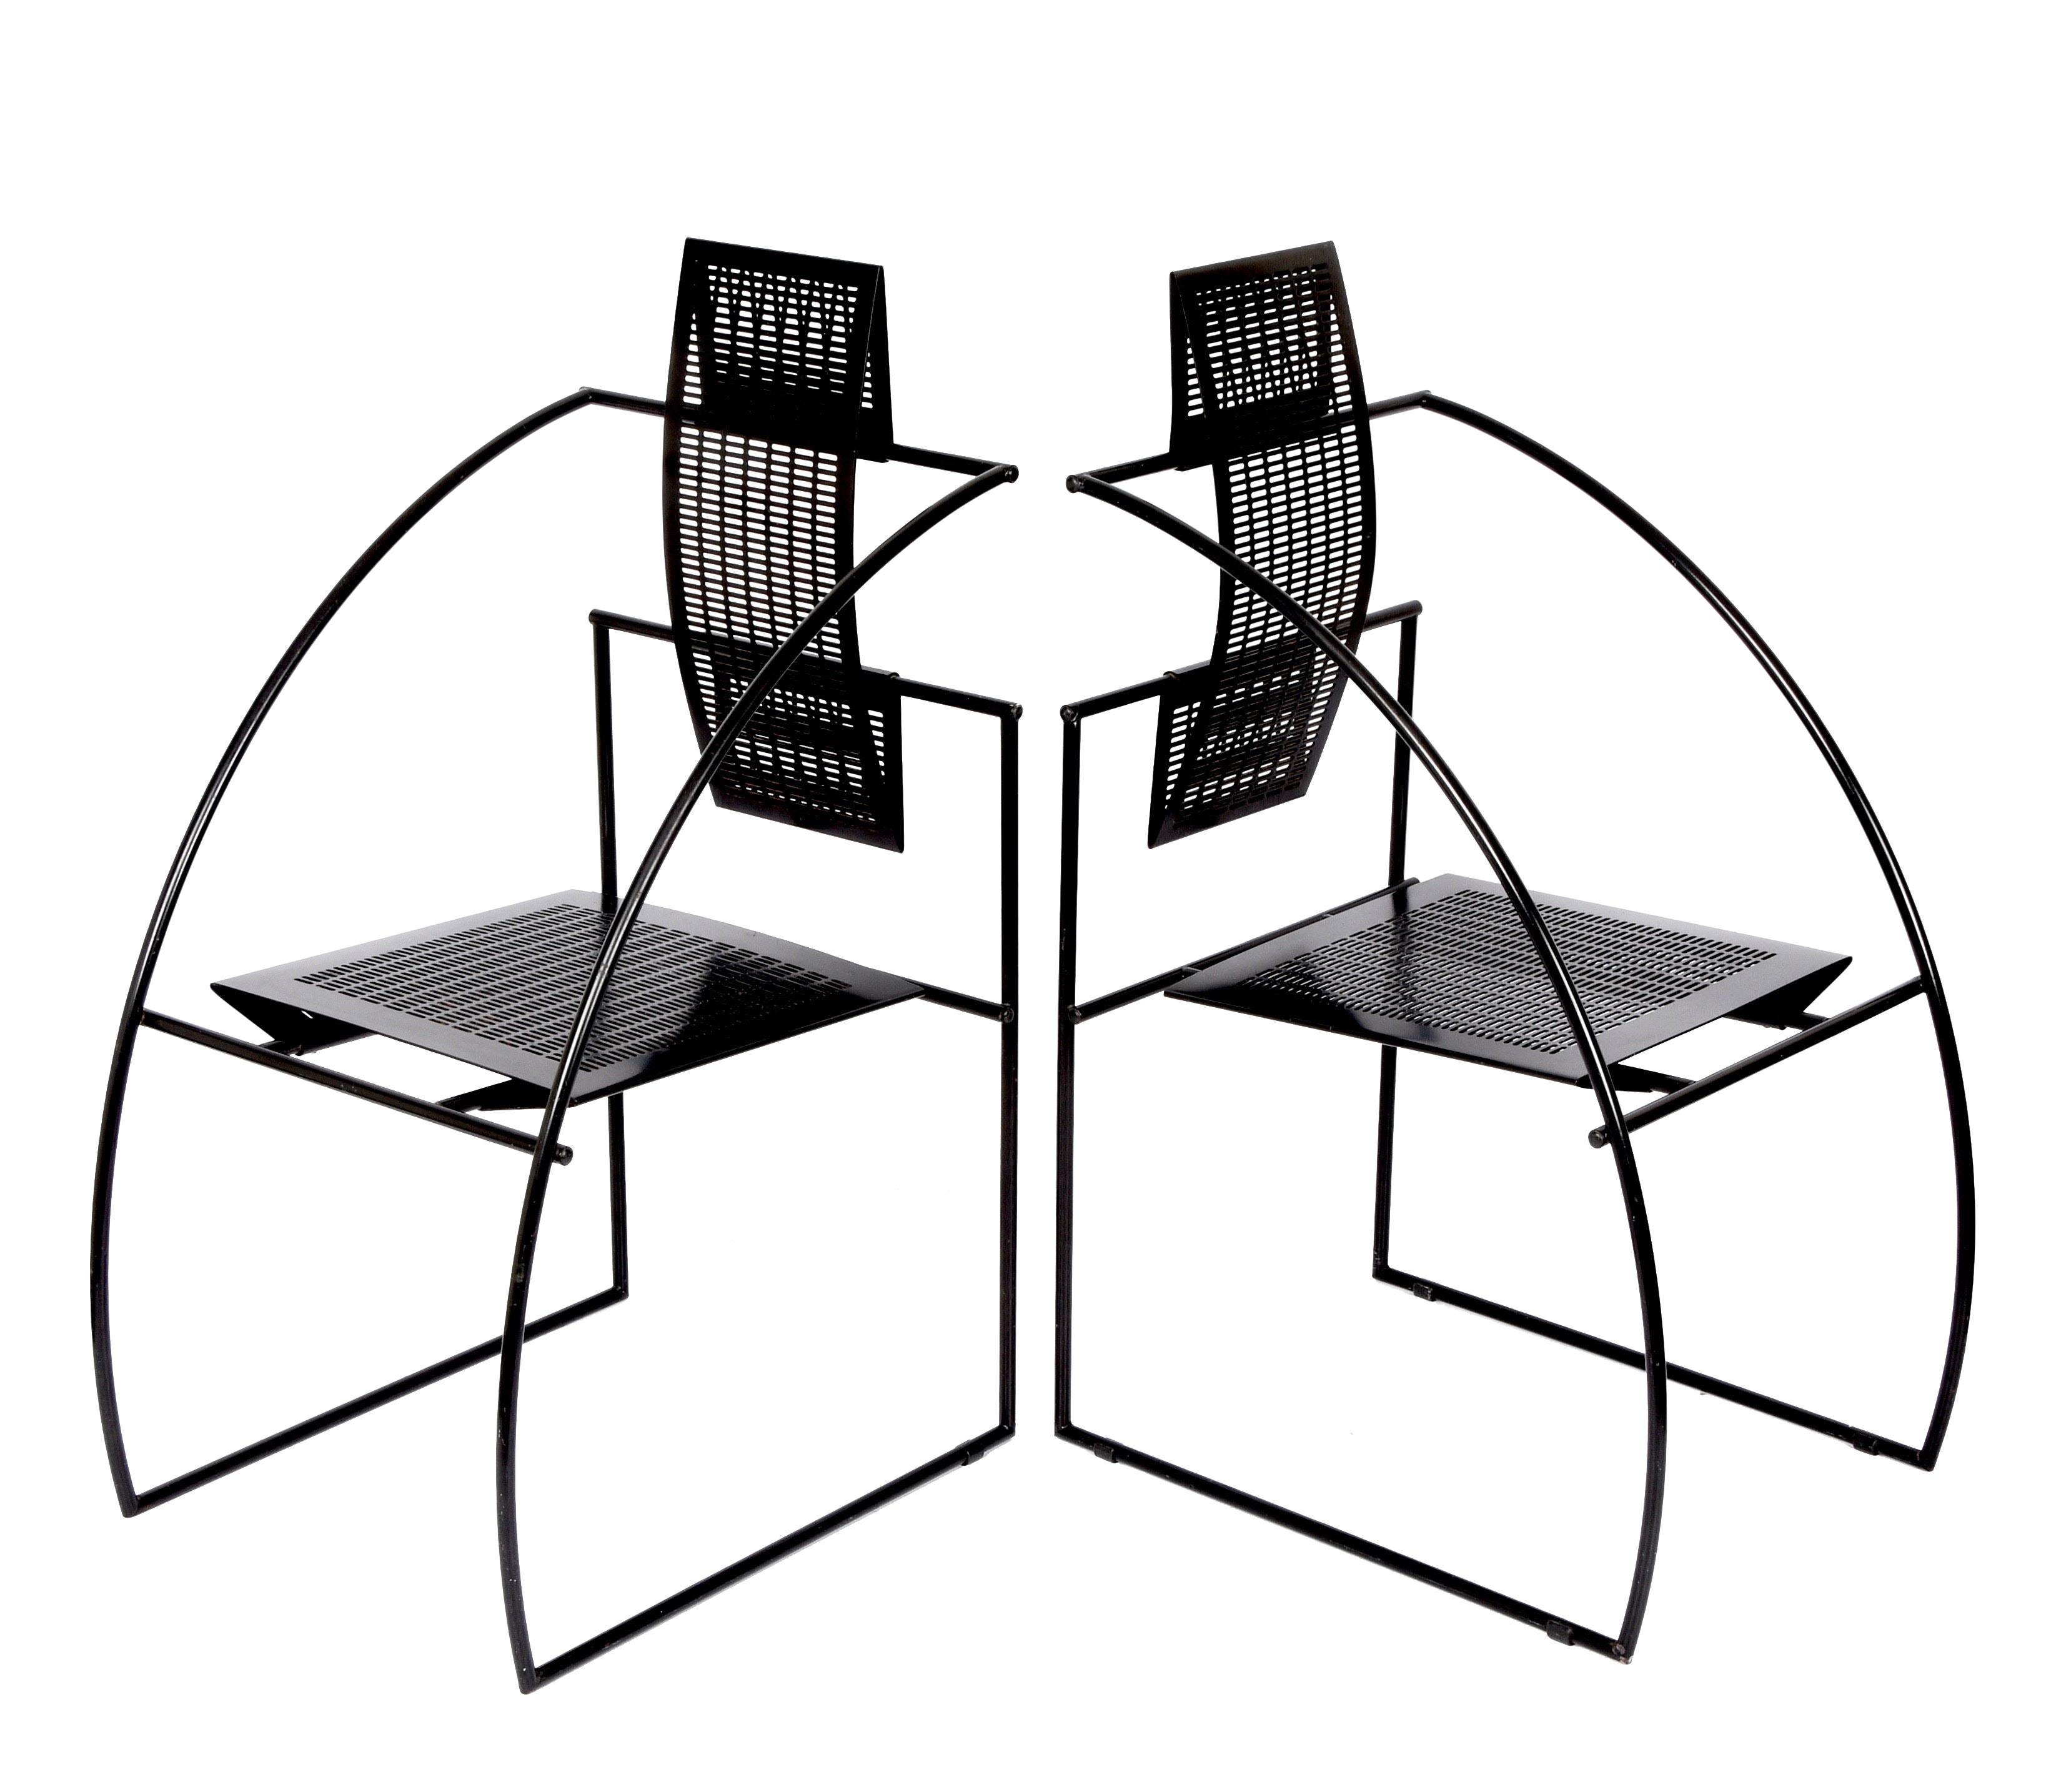 Amazing Quinta chairs designed by the Swiss architect and designer Mario Botta in Italy in 1985. This pair of chairs is made of a steel rod frame and perforated steel to form the seat and back.

In good vintage condition, this pair of chairs is no